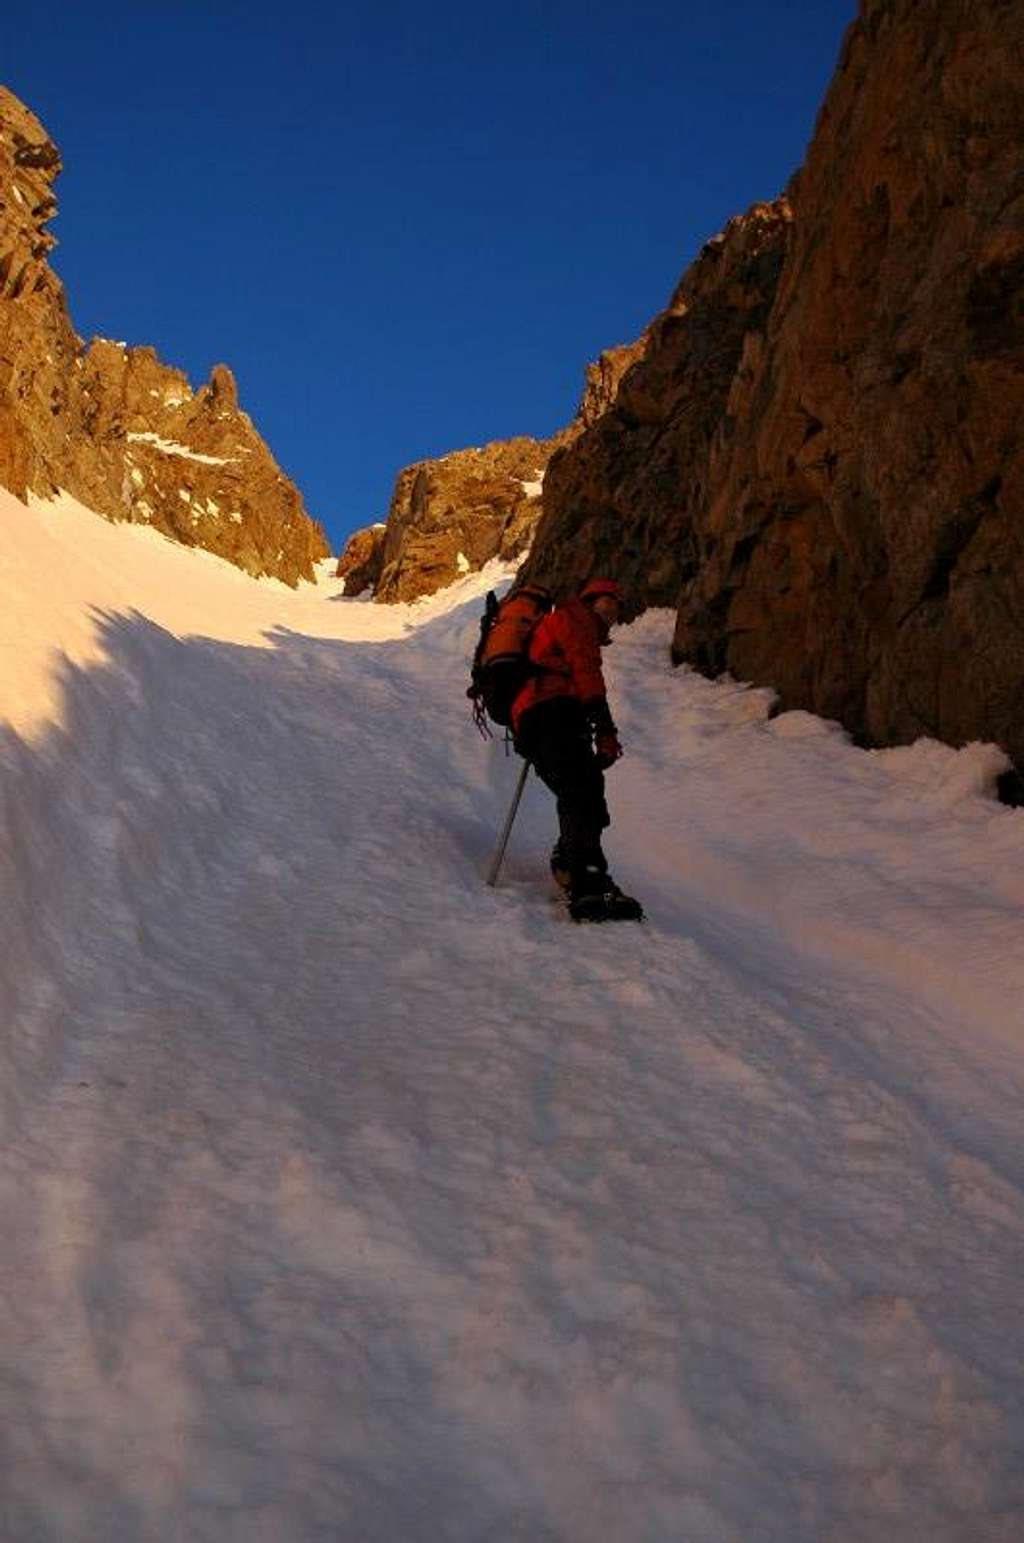 In the couloir, May 7, 2006